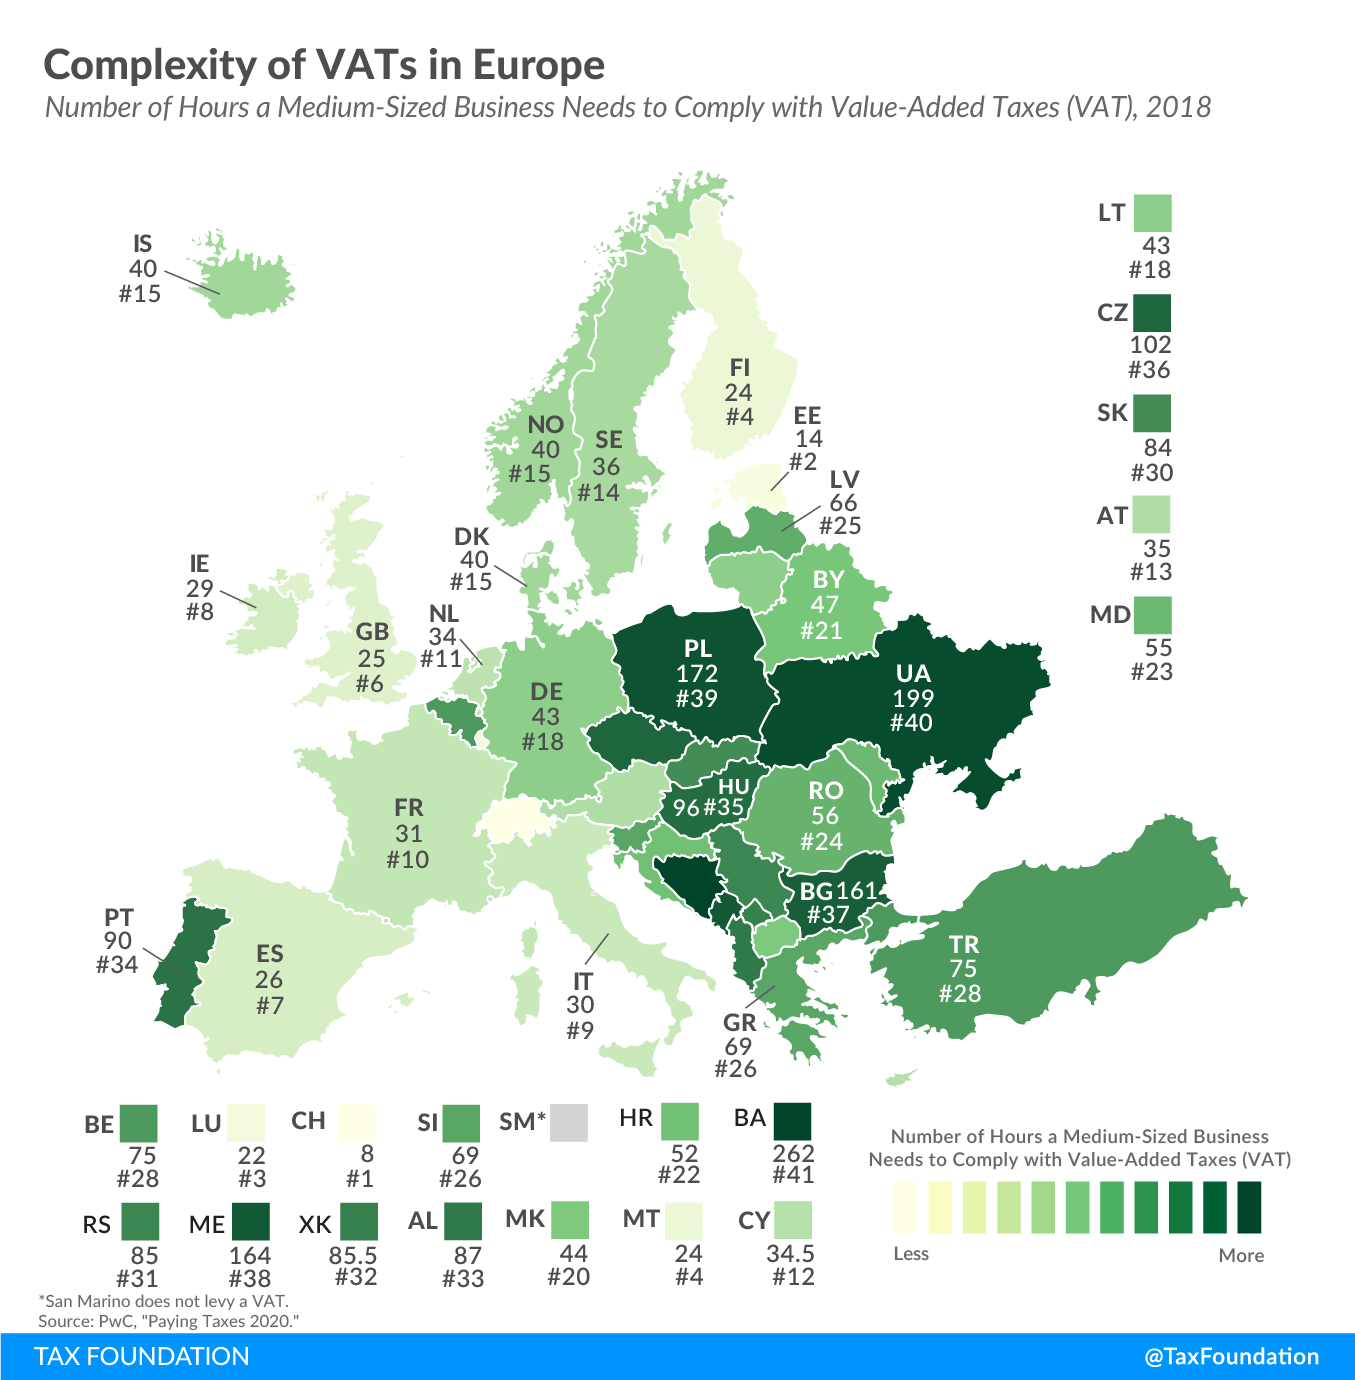 VAT complexity in Europe, complexity of VATs in Europe, Value Added Tax complexity in Europe, Value-Added Tax administrative tax burden in europe 2020, VAT administrative tax burden europe 2020